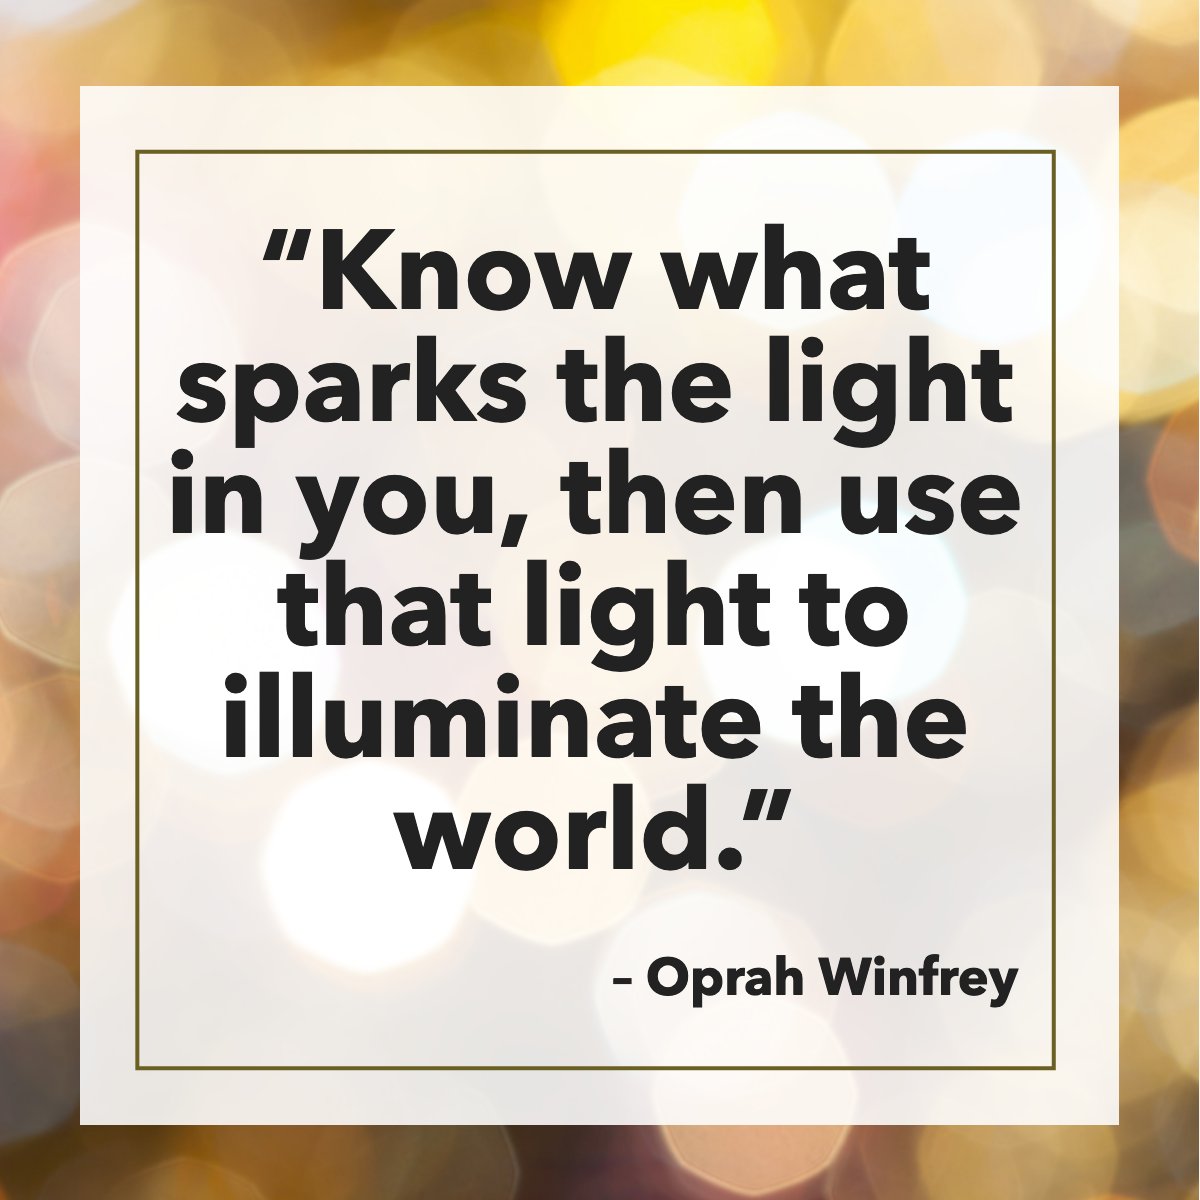 It's always important to know the things that make you feel better

#quotegram #quoteoftheday✏️ #oprahwinfrey  #dreams💭 

 #veteranhomebuyers #militaryhomebuyers #veteransellinghome #militarysellinghome #PCSmove #militaryPCS #veteranrealtor #militaryrealtor